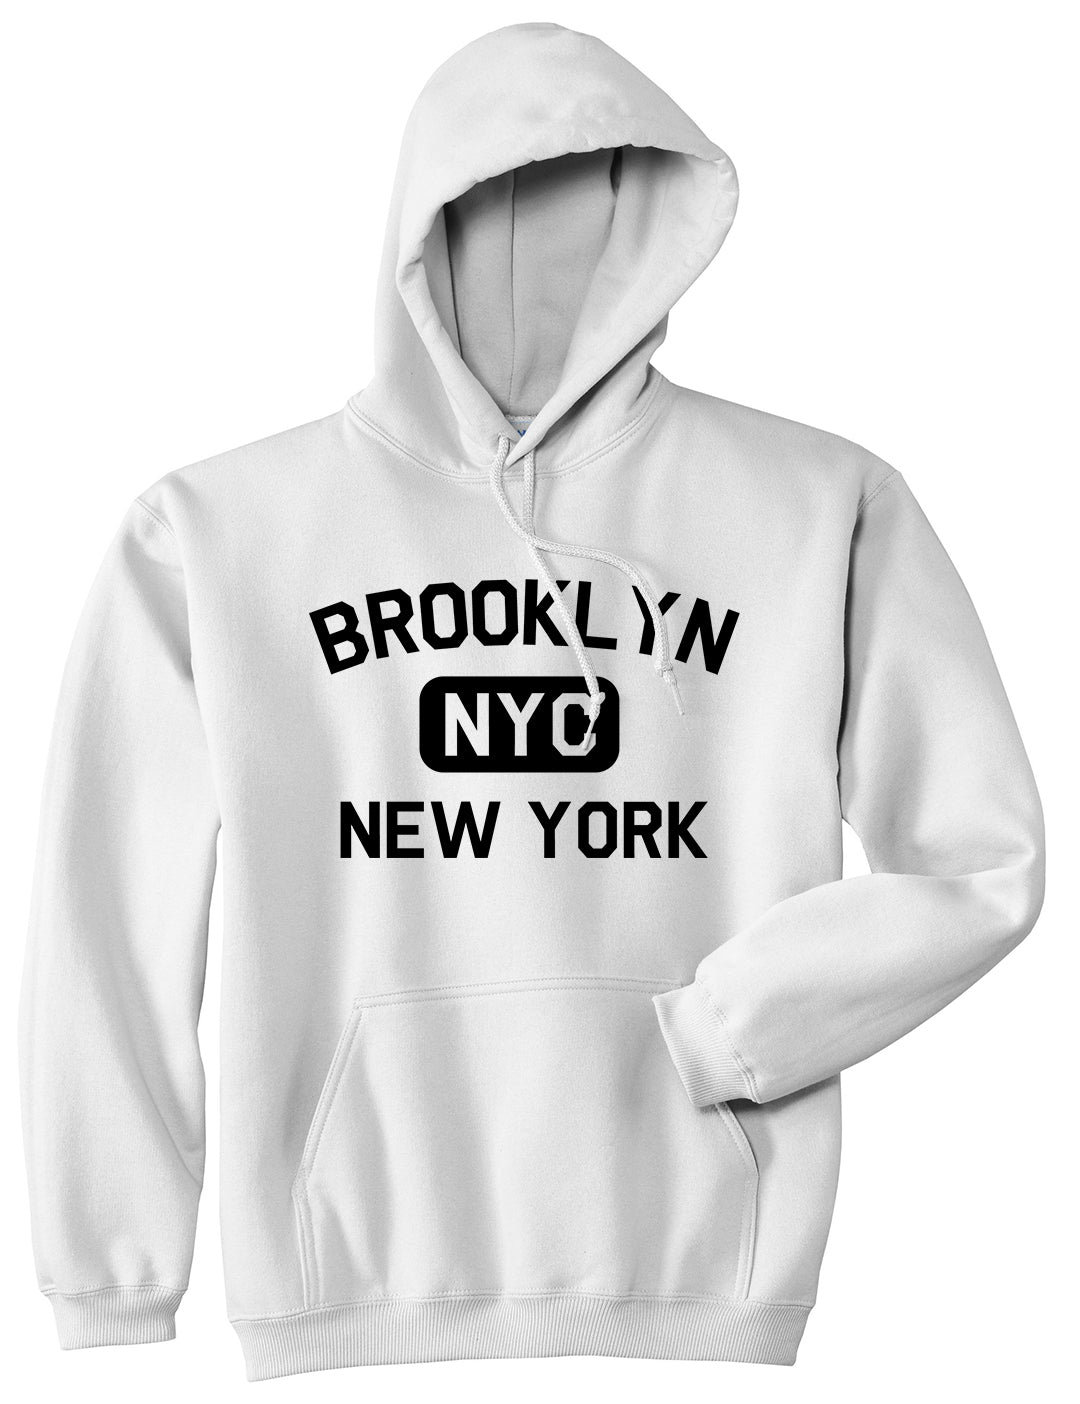 Brooklyn Gym NYC New York Mens Pullover Hoodie White